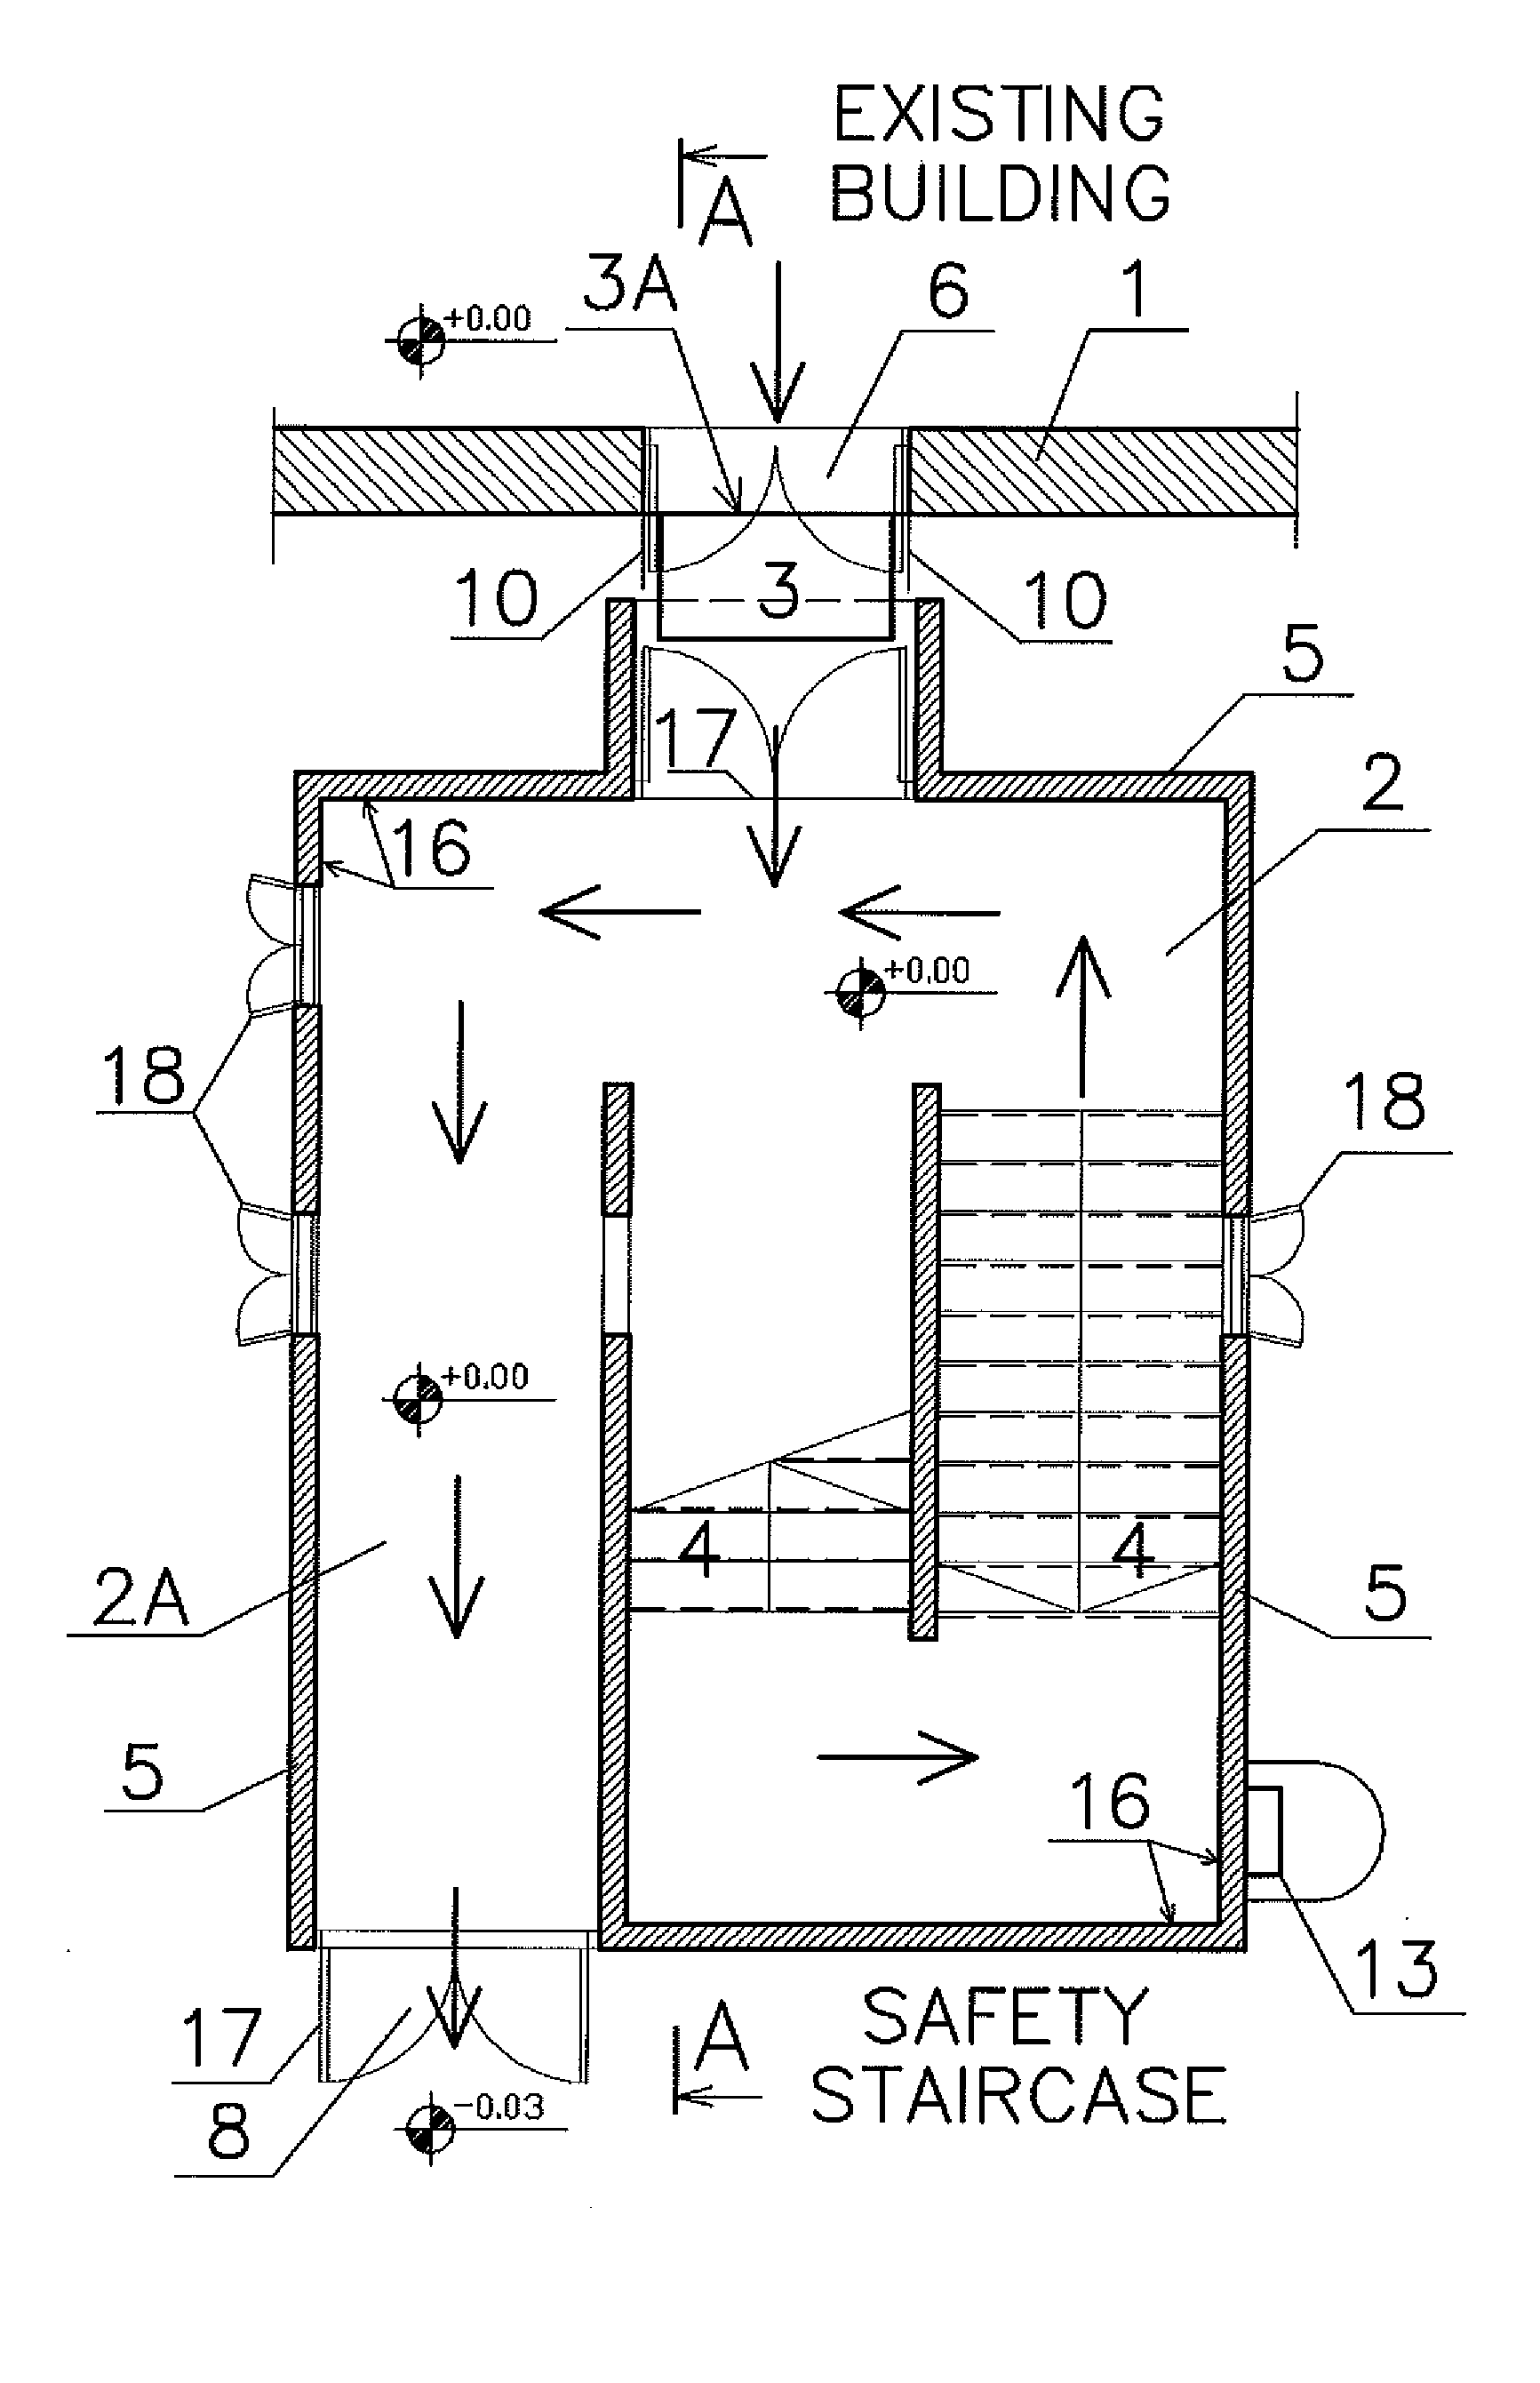 Escape staircase and method for allowing occupants of a building to escape safely during an emergency